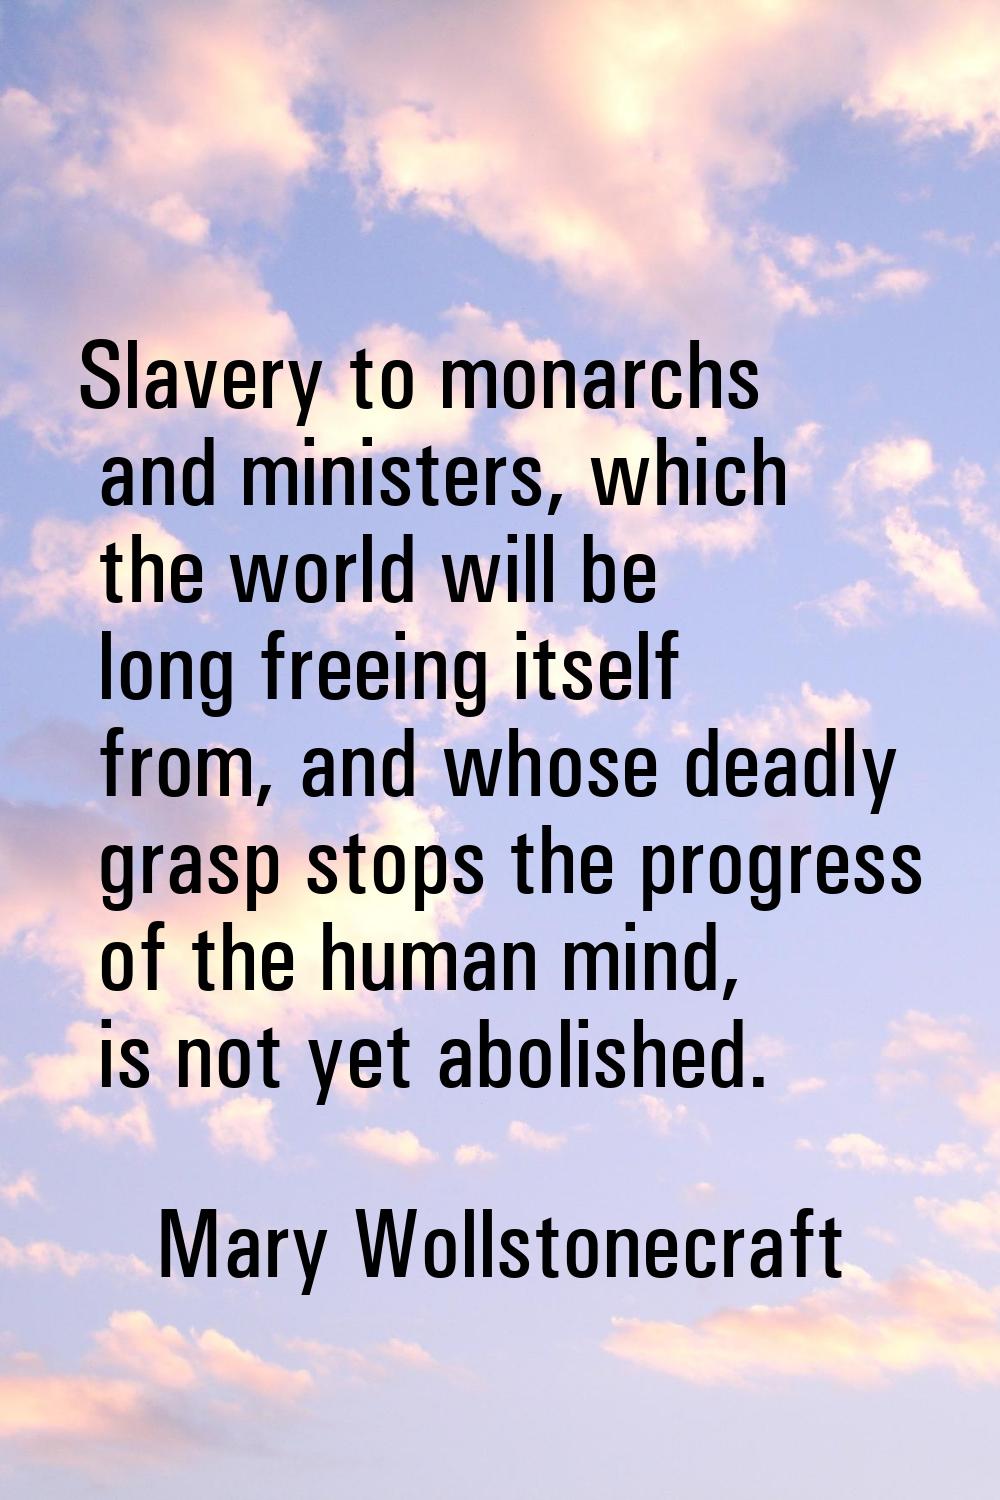 Slavery to monarchs and ministers, which the world will be long freeing itself from, and whose dead